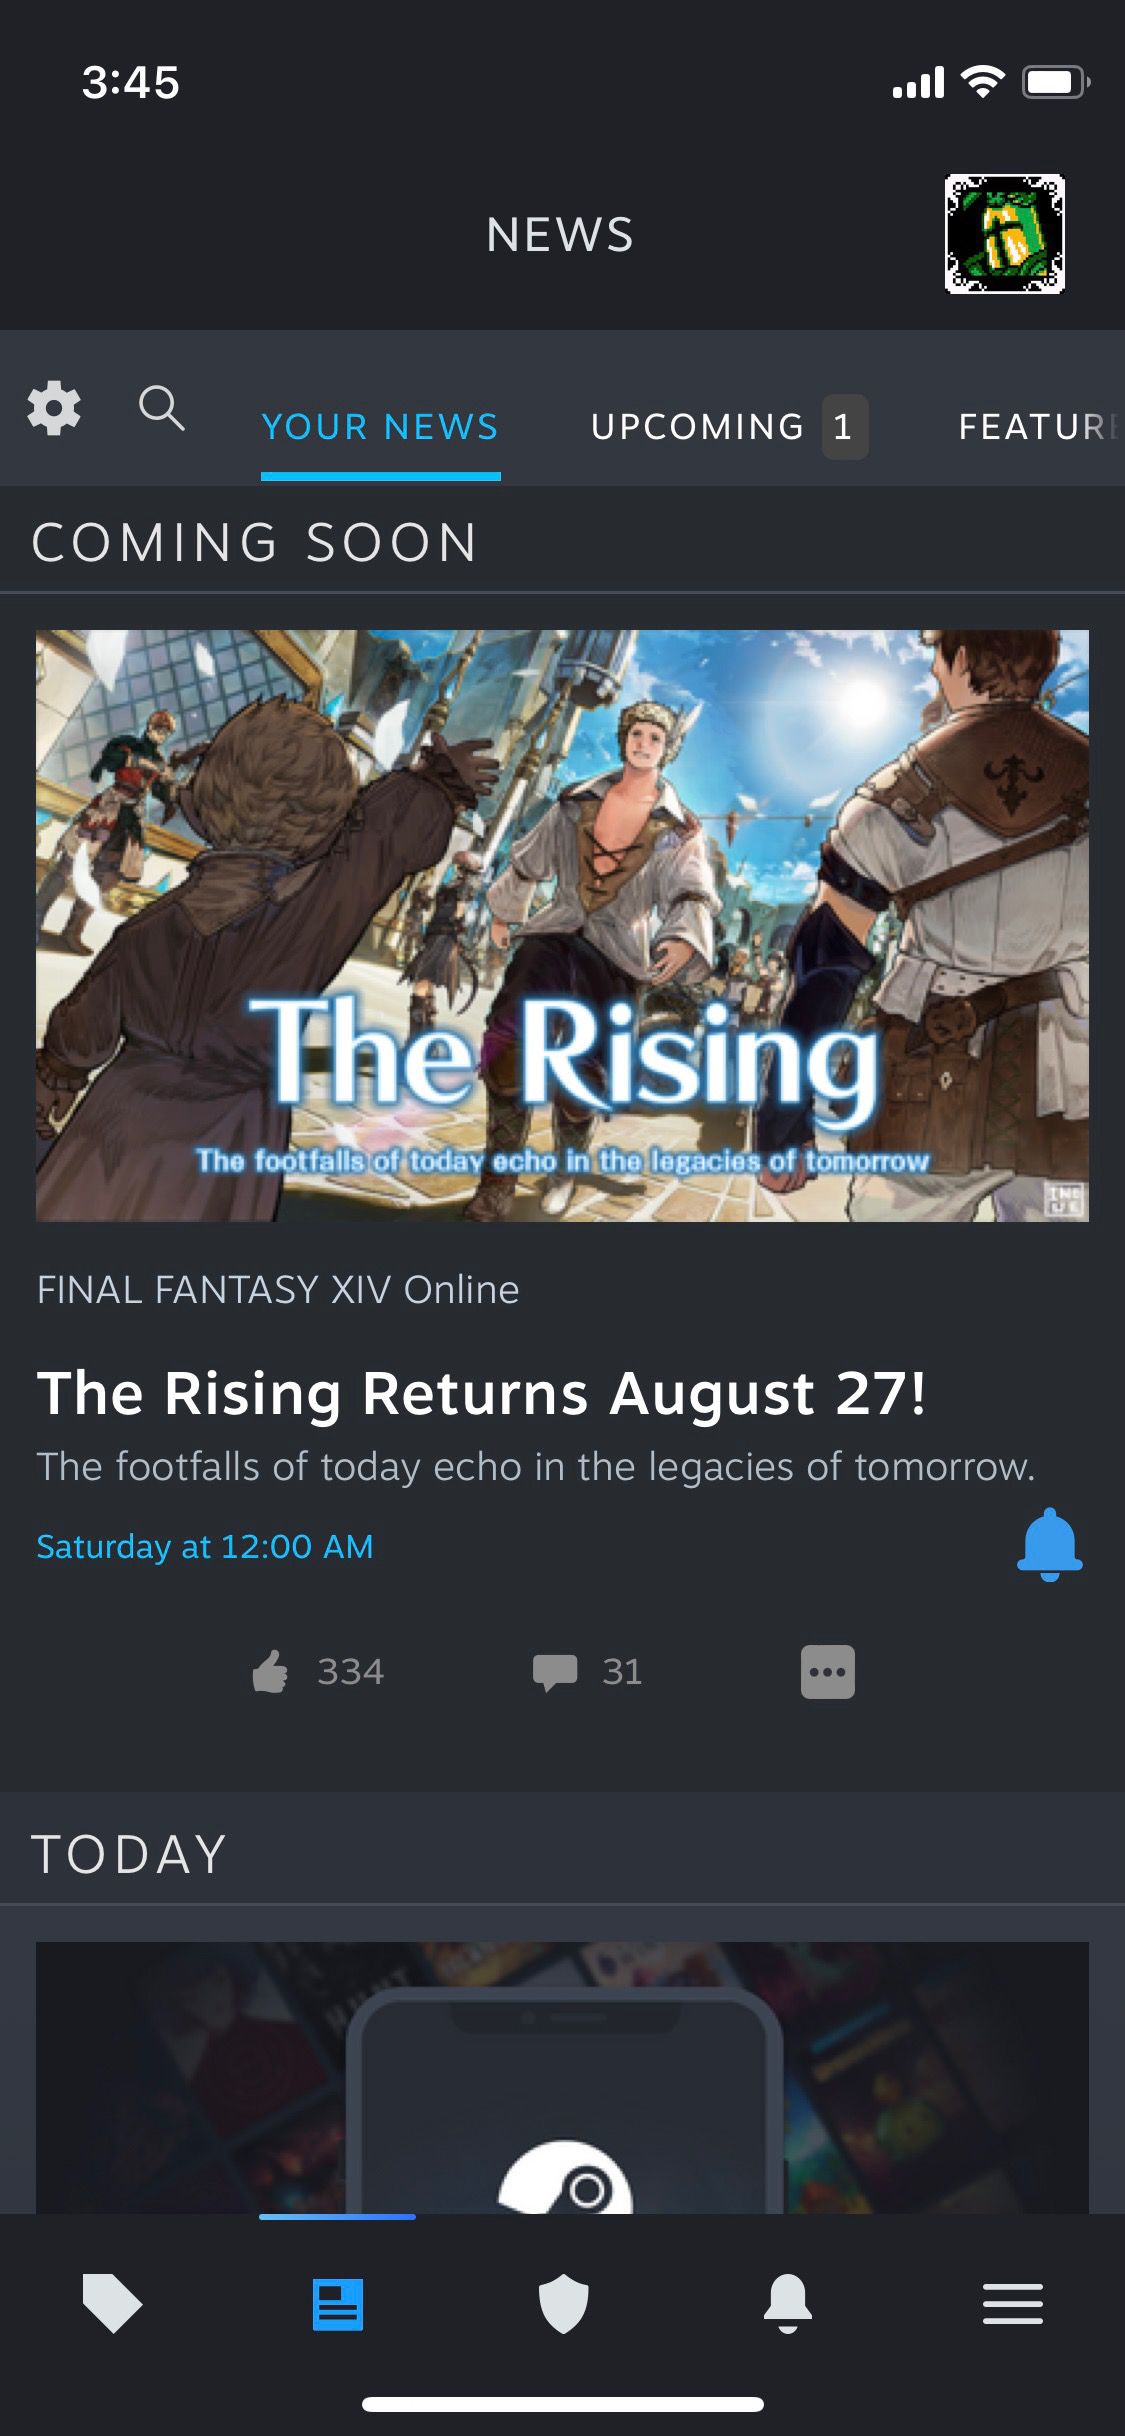 The news feed in the new Steam mobile app. The first entry is about Final Fantasy XIV.